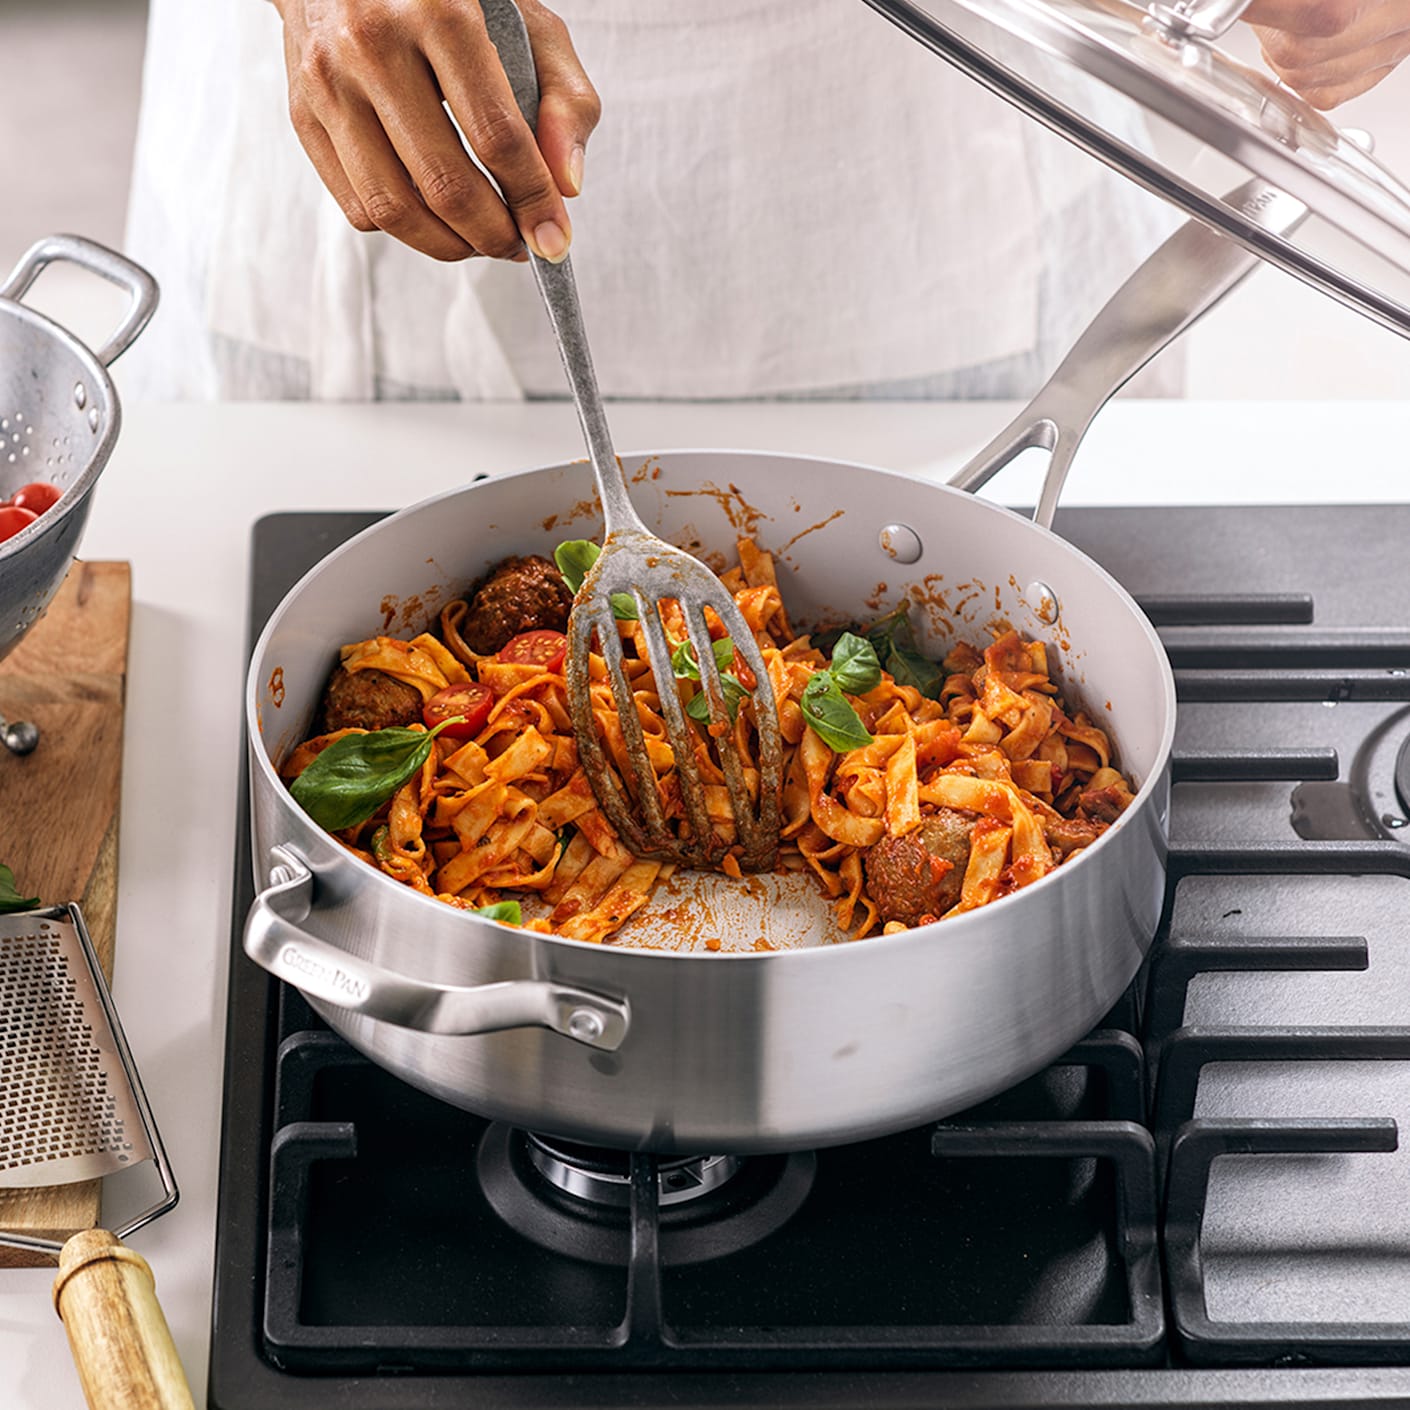 GreenPan Cookware - The Pioneers of Eco-Friendly and Non-Toxic Kitchenware